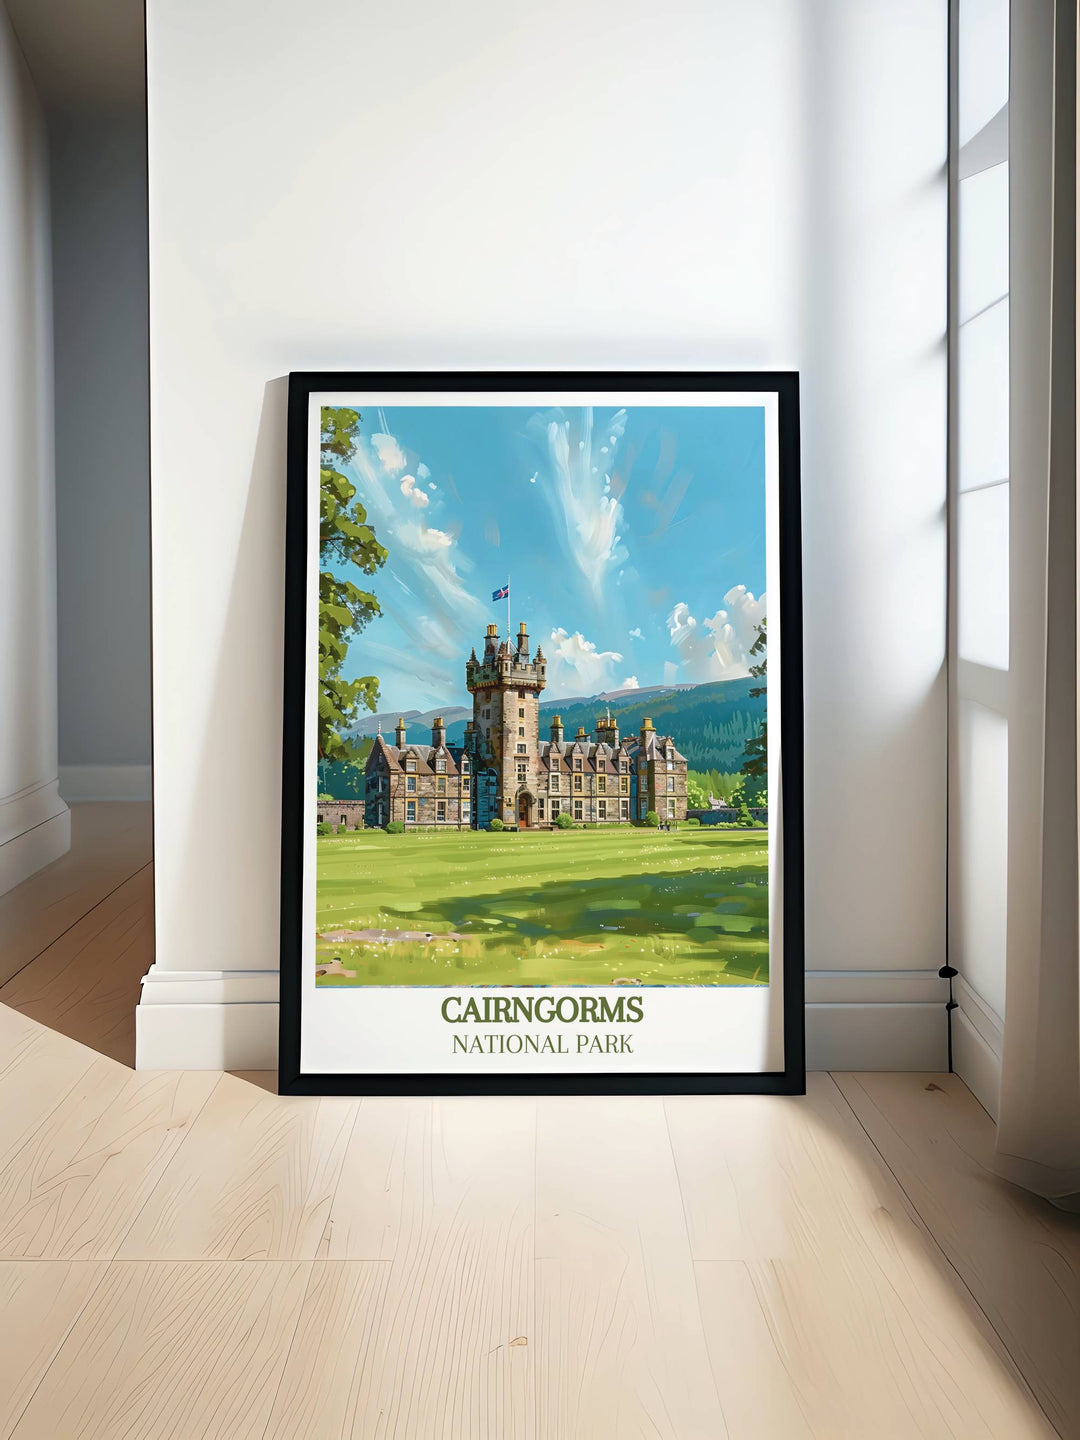 Cairngorms Poster showcasing the breathtaking beauty of Scotland with Balmoral Castle in the background. Perfect for home decor and gifts, this vintage travel print brings the majestic Scottish Highlands to life in stunning detail.